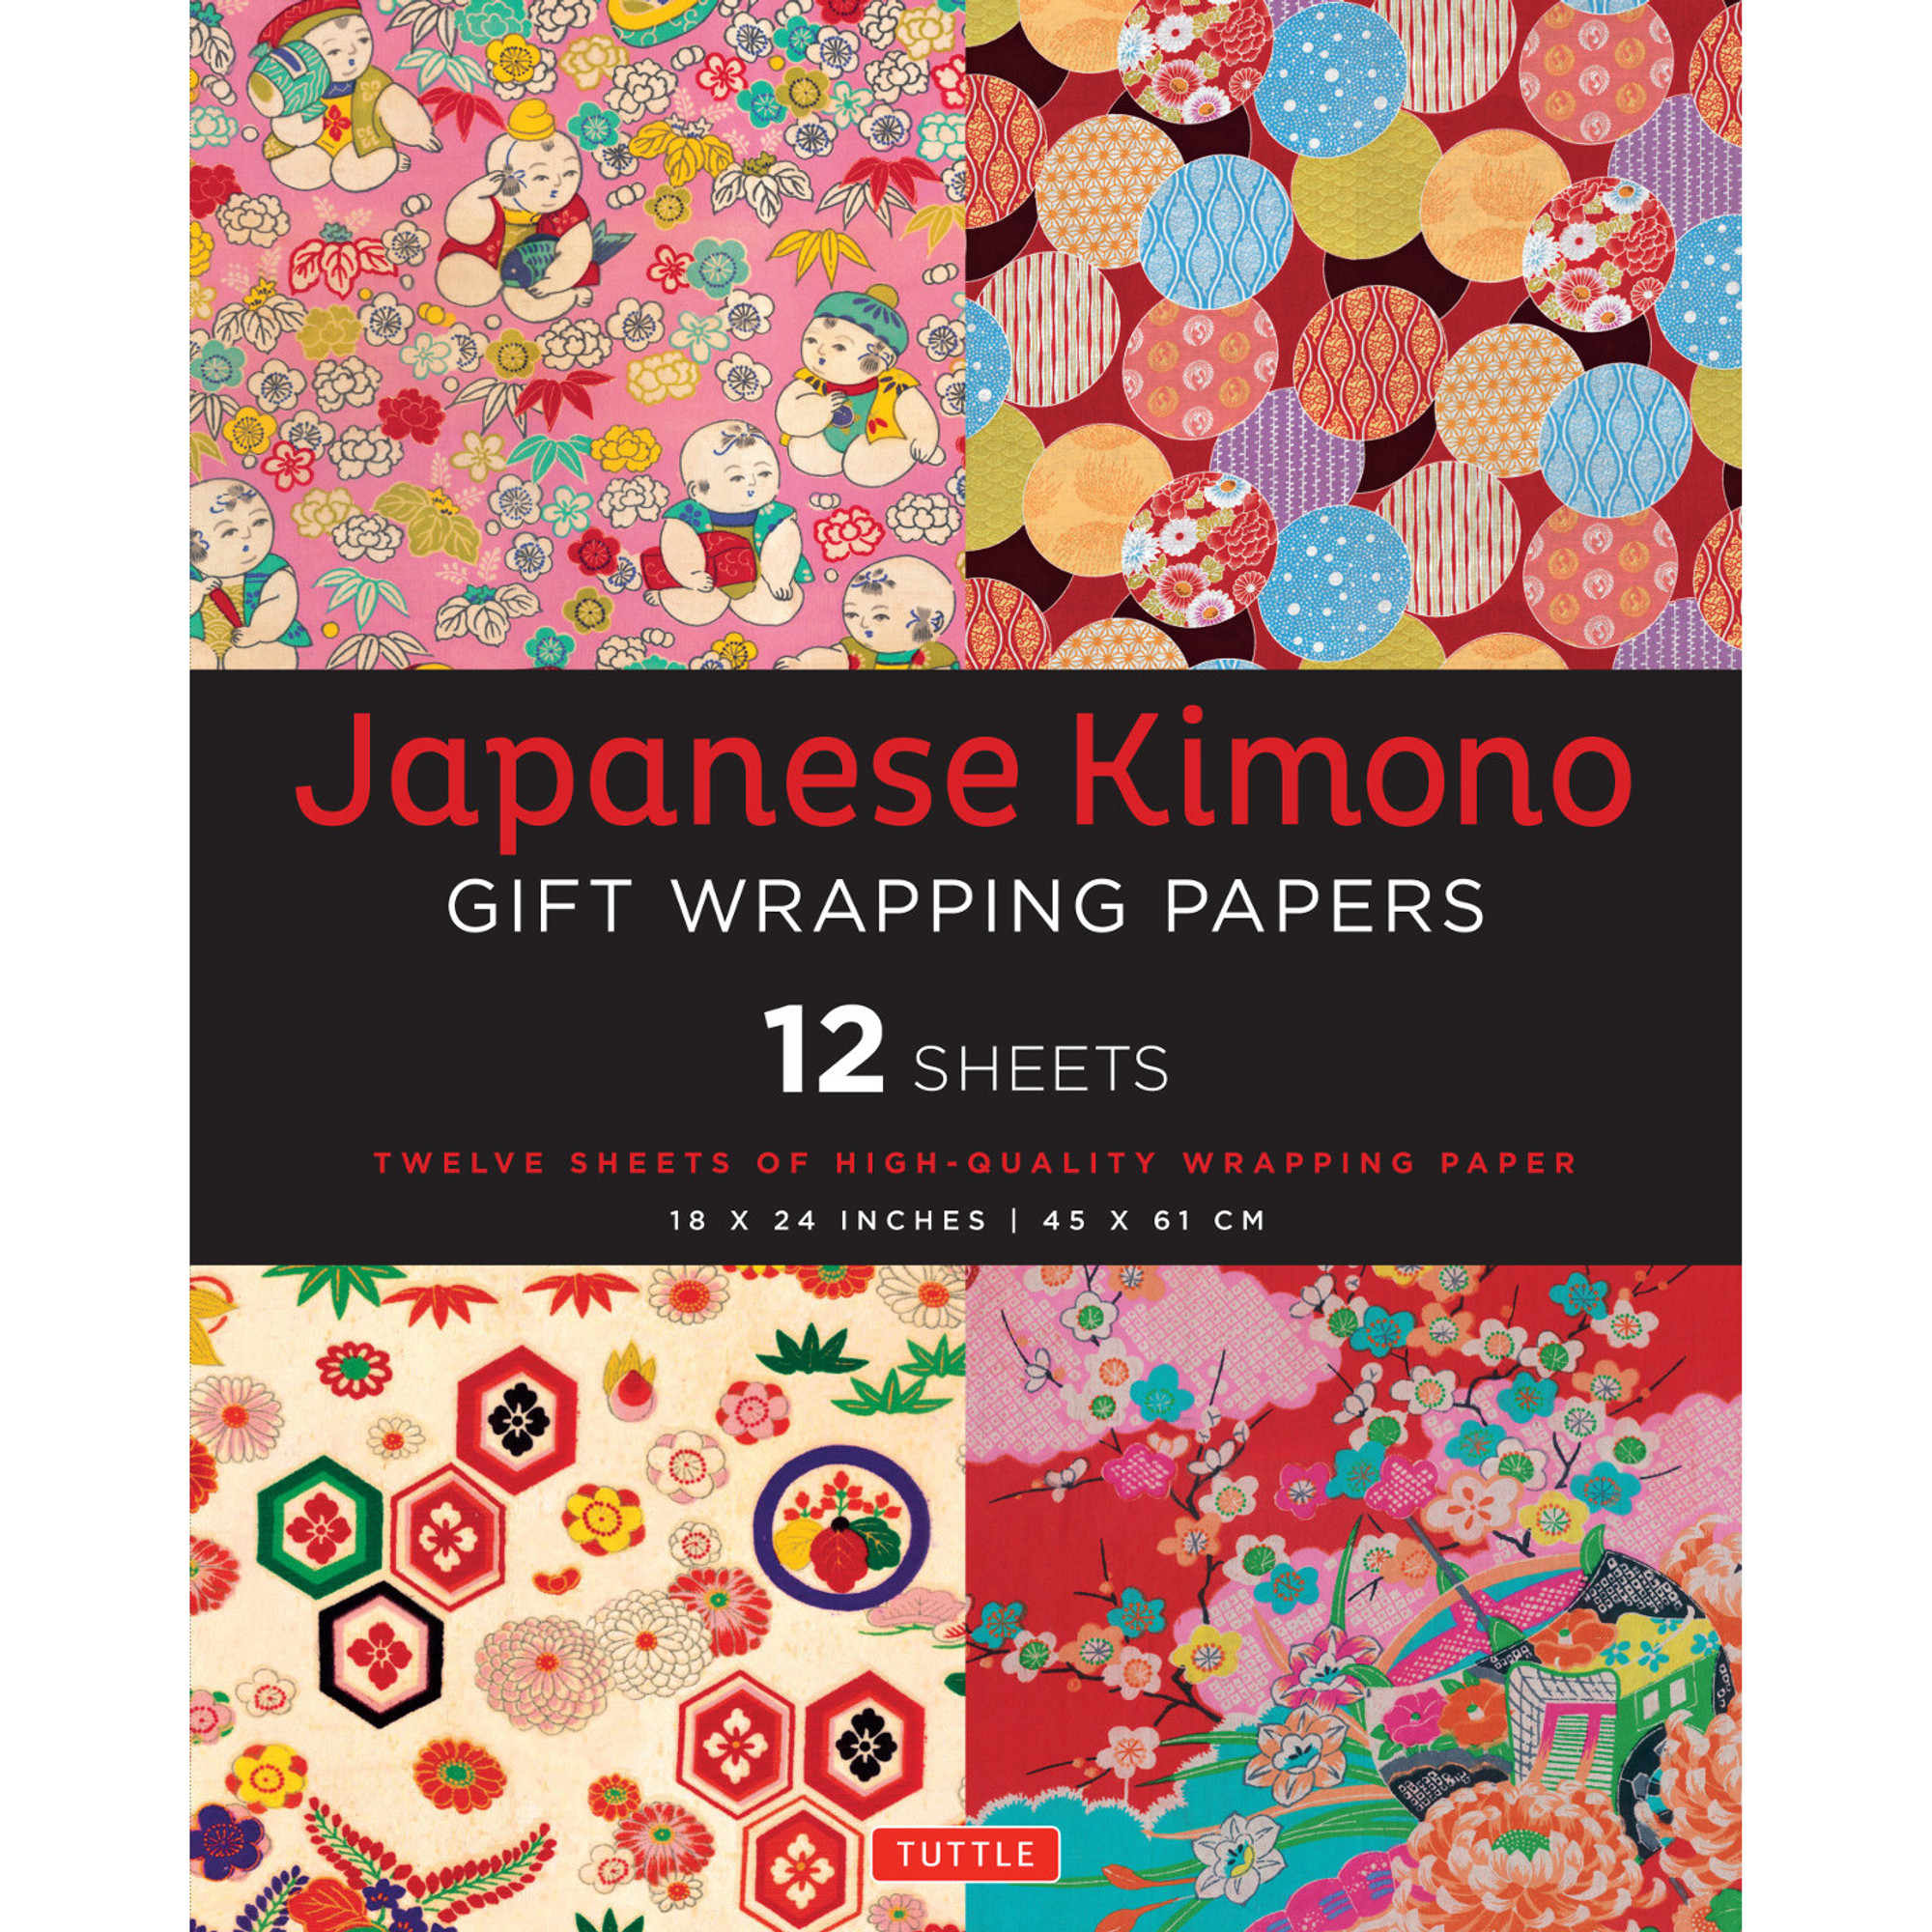 11 Kimono Patterns and Their Meanings